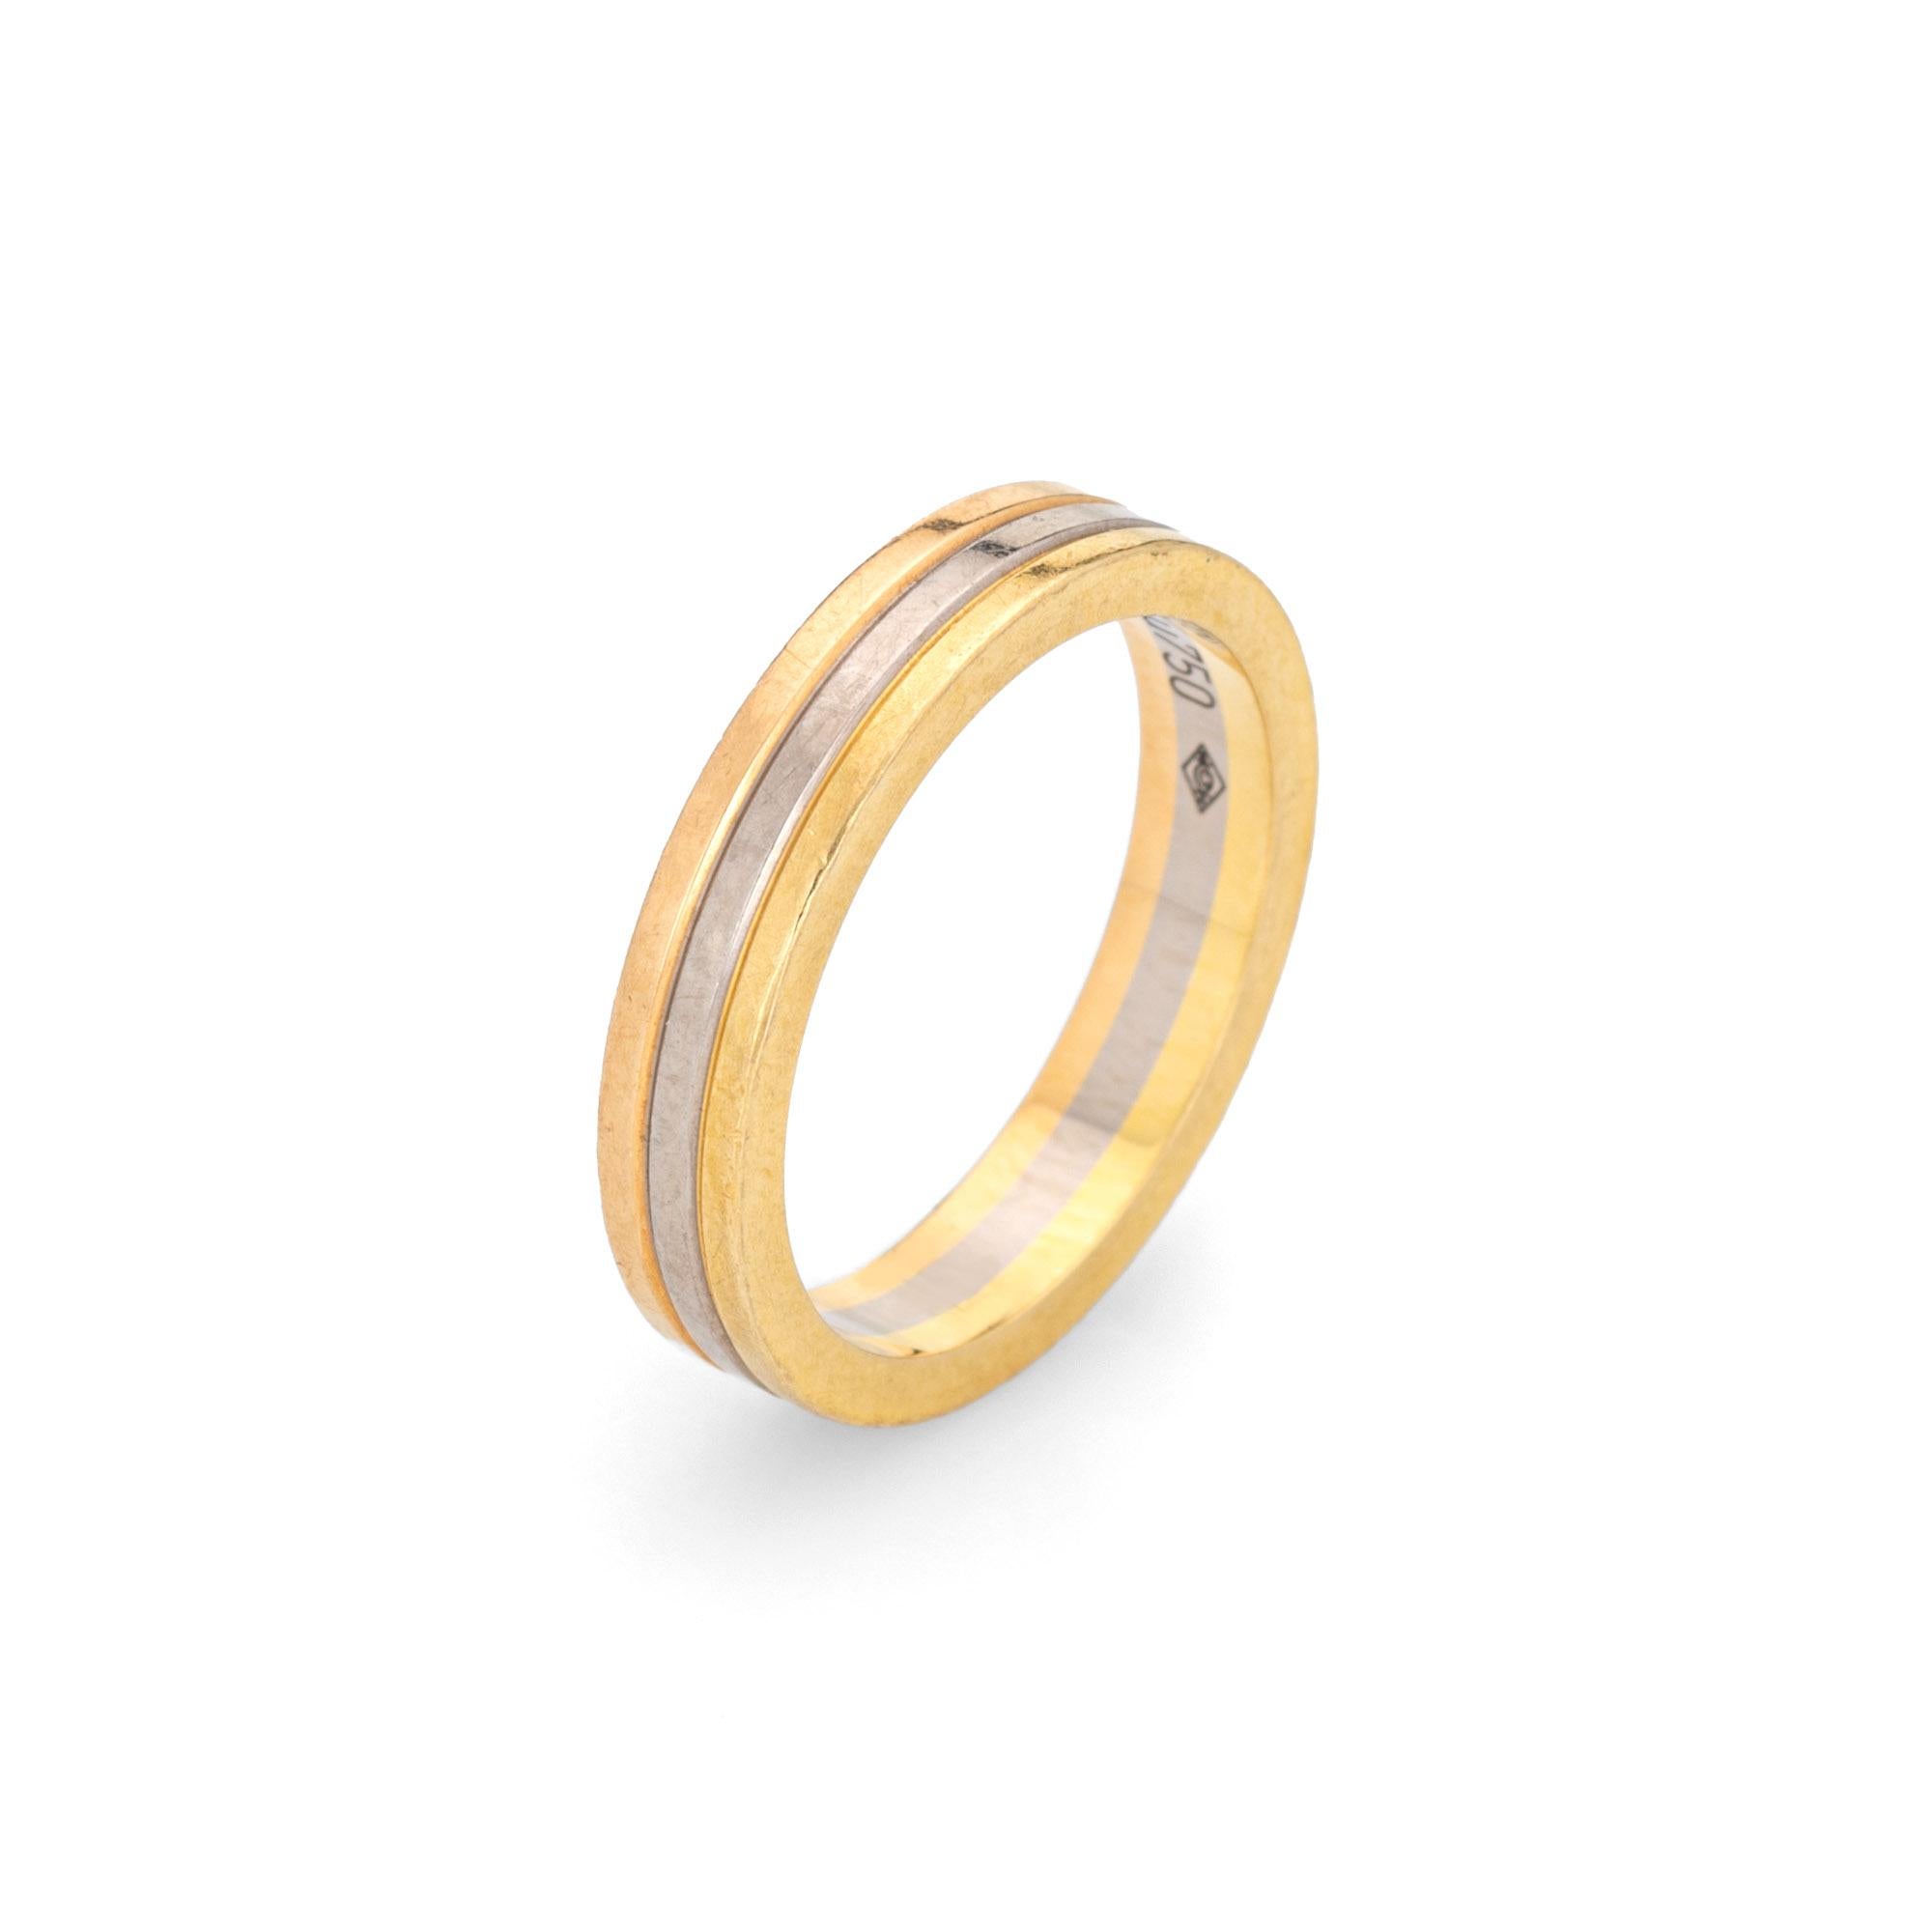 Pre-owned Vendome Louis Cartier wedding band crafted in 18k yellow, white & rose gold.  

The Cartier ring features bands of 18k rose, yellow & white gold. The 3.5mm wide ring is great worn alone or layered with your fine jewelry from any era. 

The